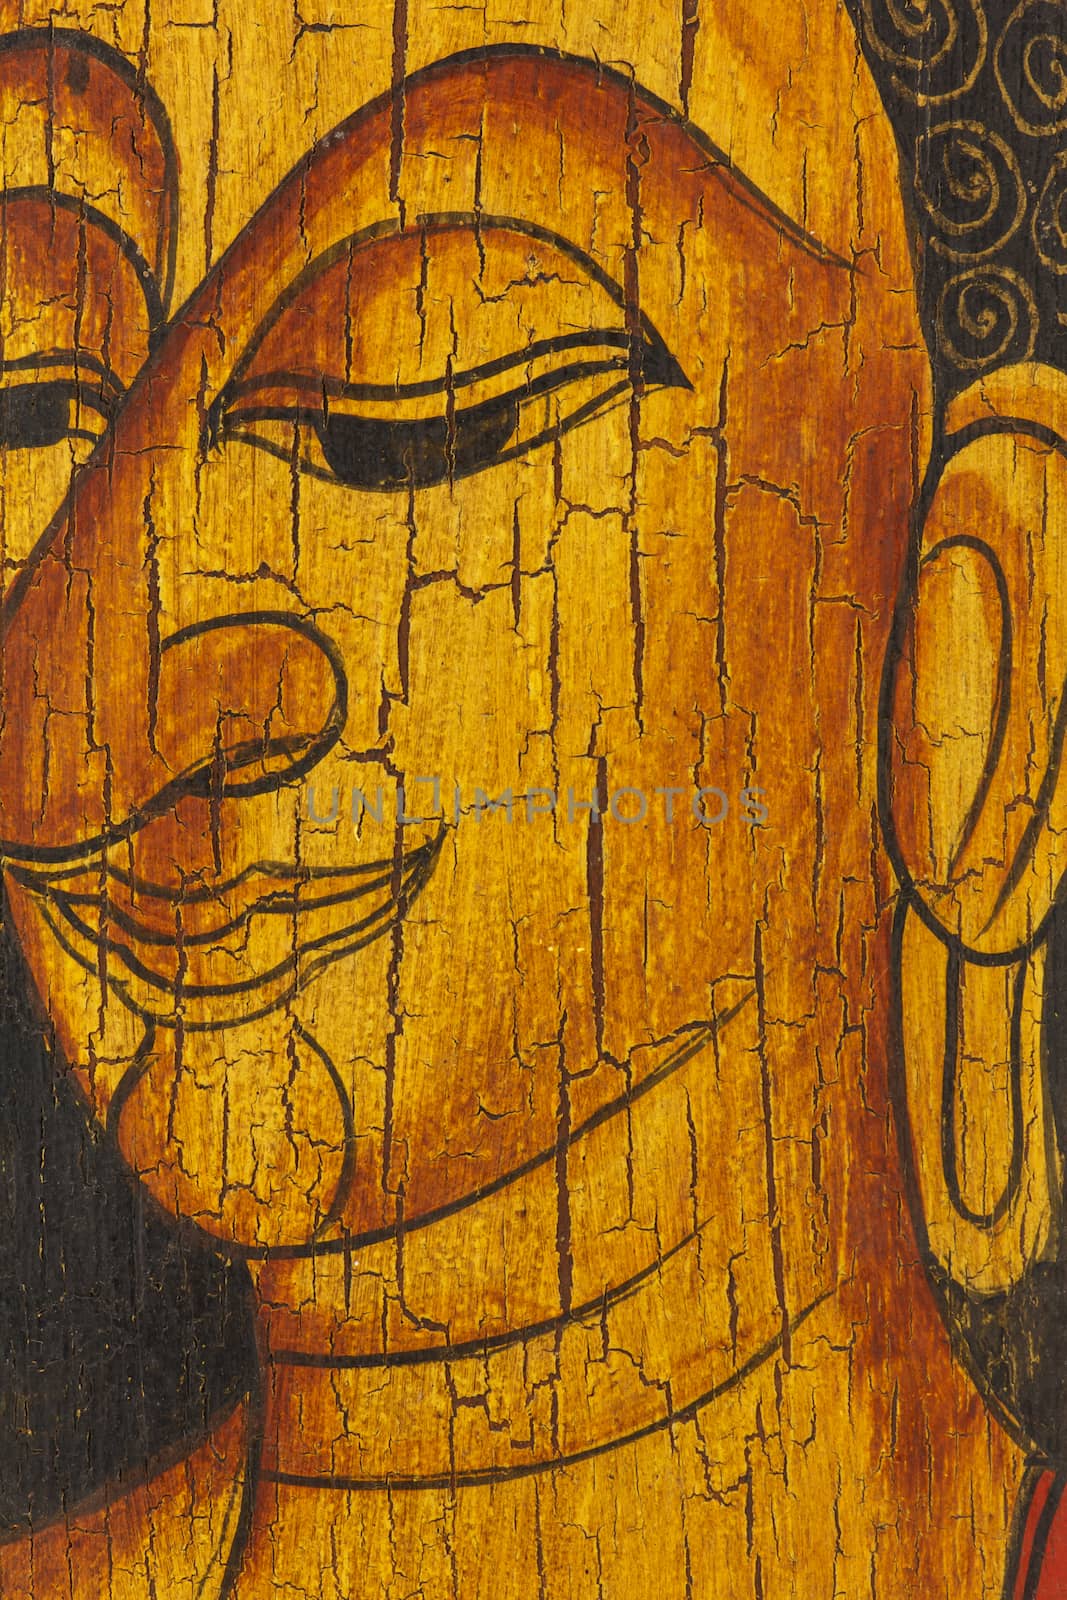 Face of buddha, Thai style painted on wood by vitawin